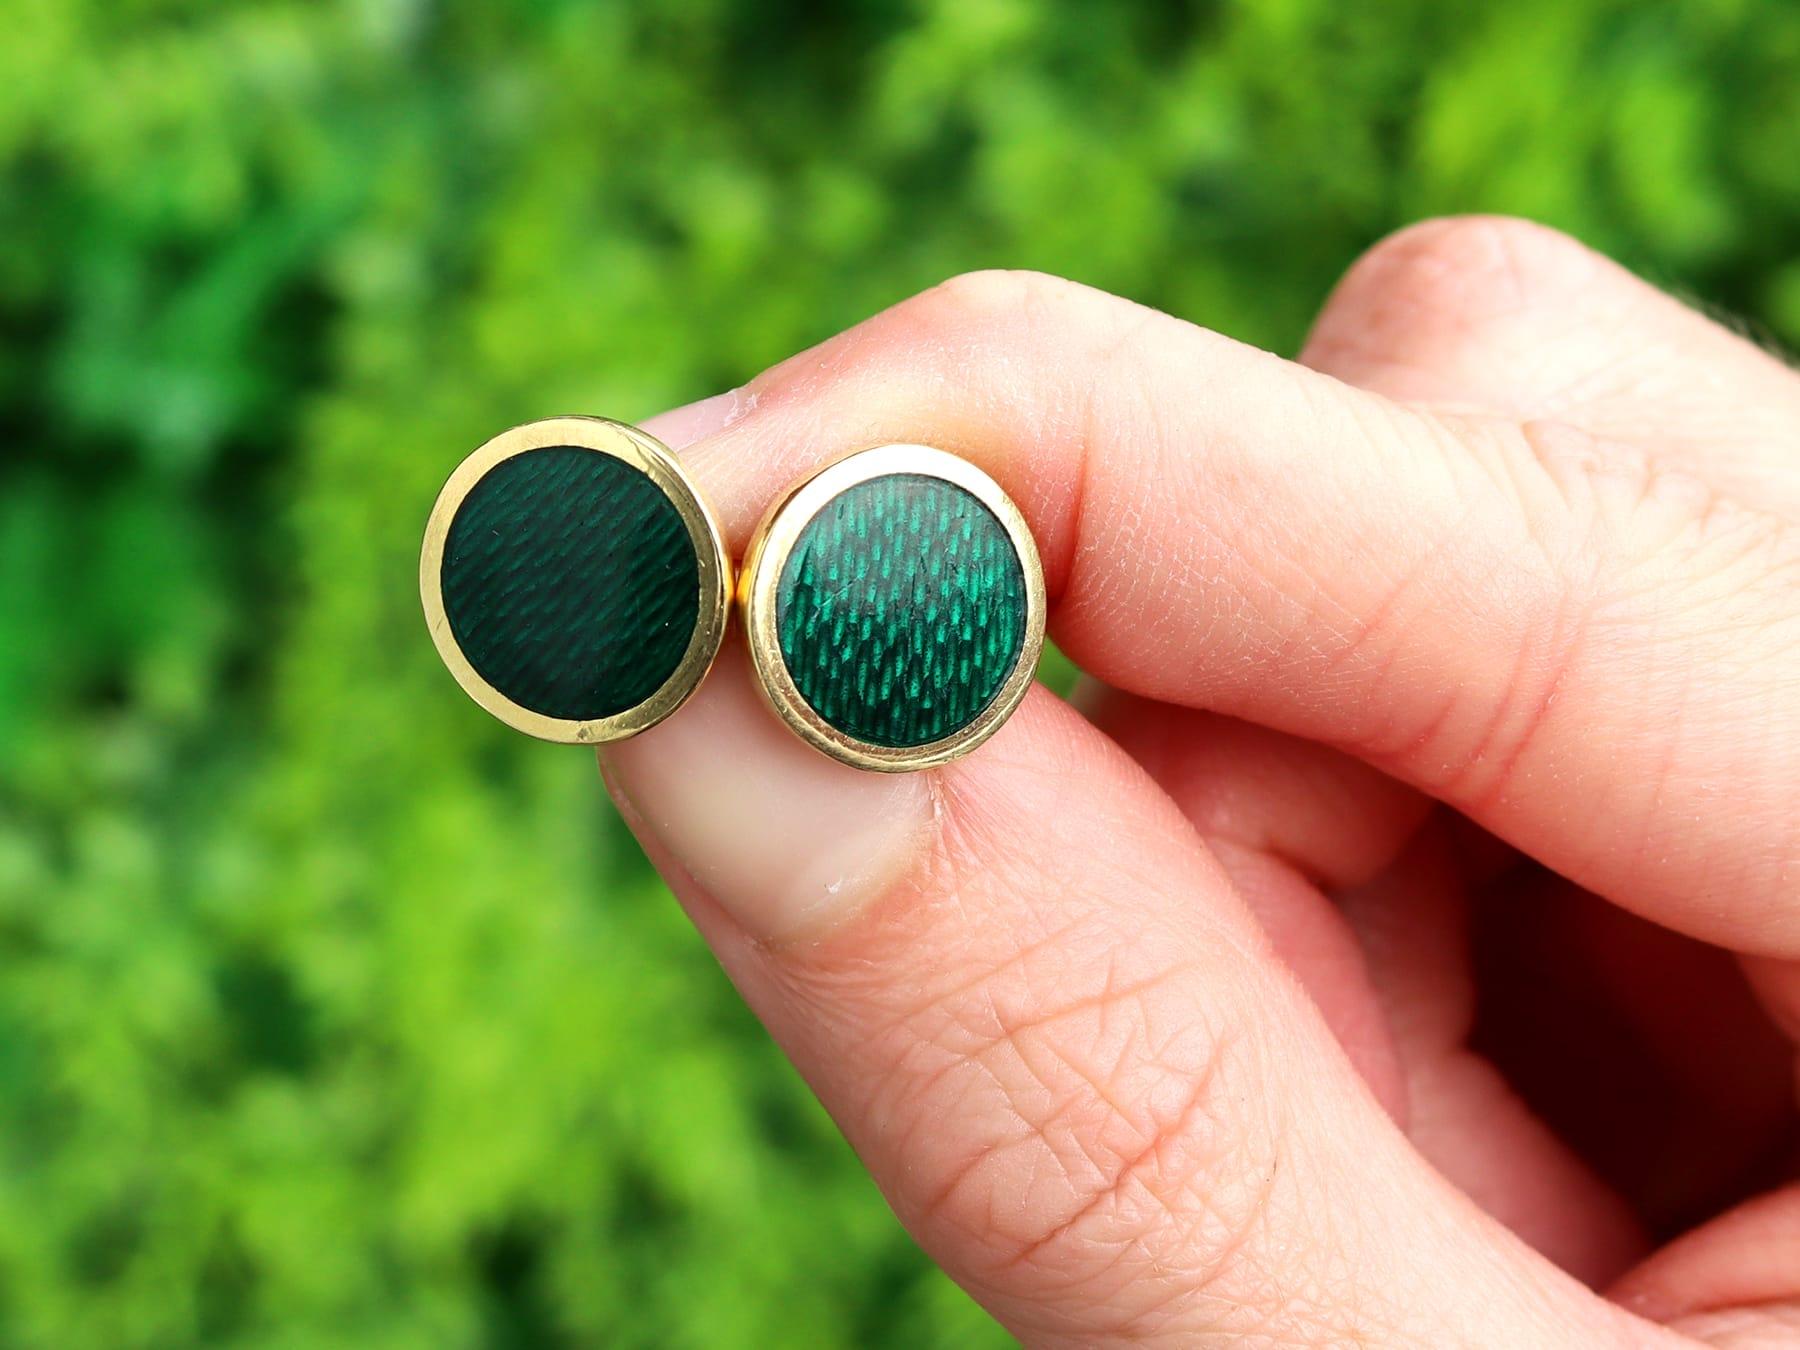 A fine and impressive vintage Italian pair of green guilloché enamel and 18 karat yellow gold cufflinks; part of our diverse vintage jewelry and estate jewelry collections.

These fine and impressive green enamel cufflinks have been crafted in 18k